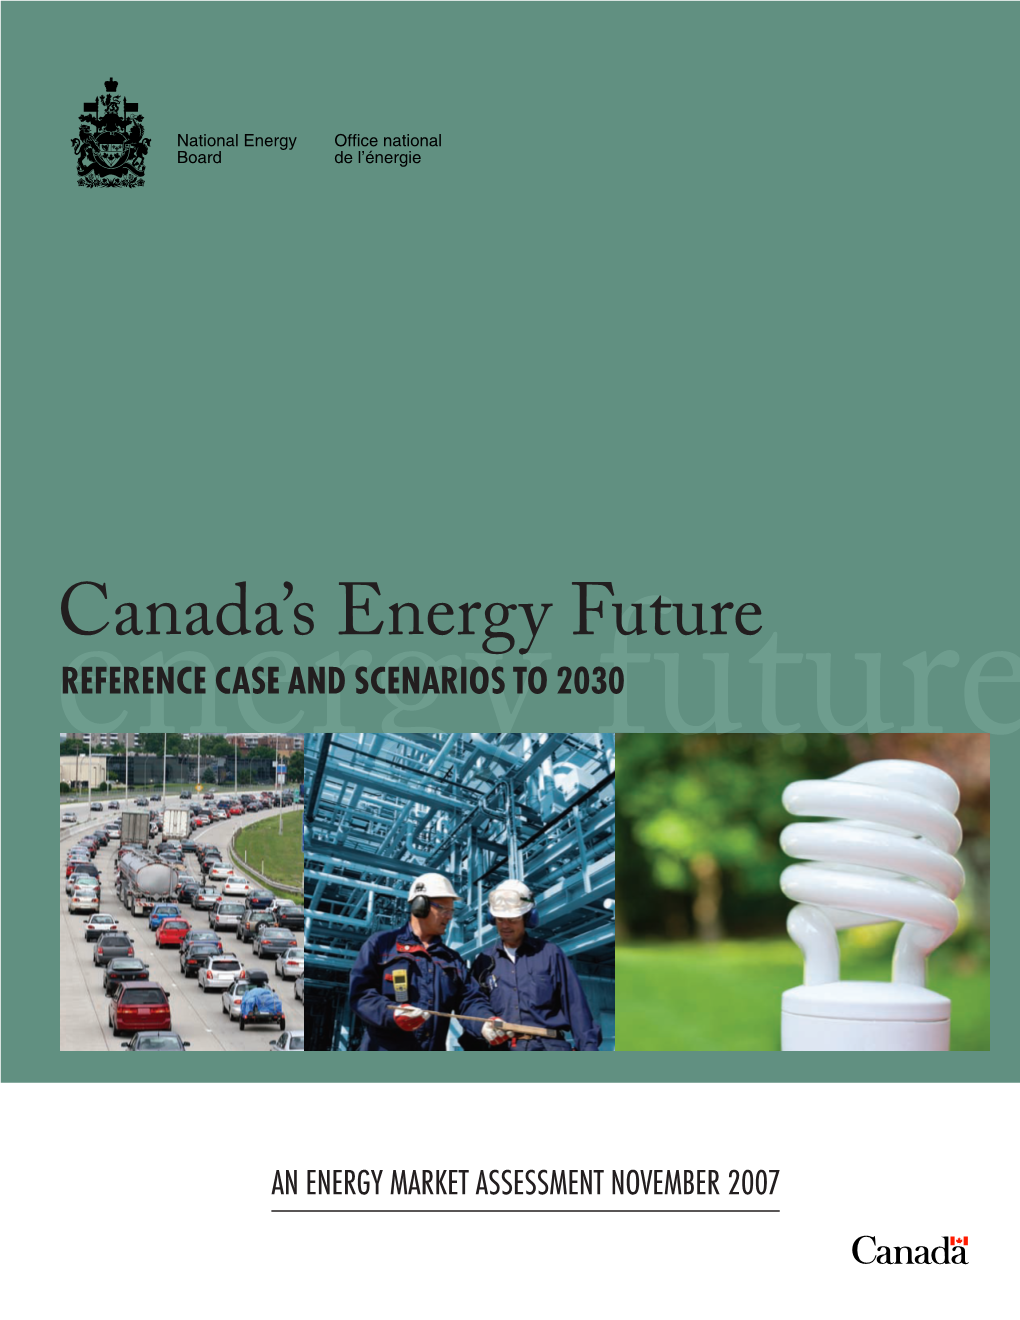 Canada's Energy Future Includes Minor Revisions and an Expanded Appendices